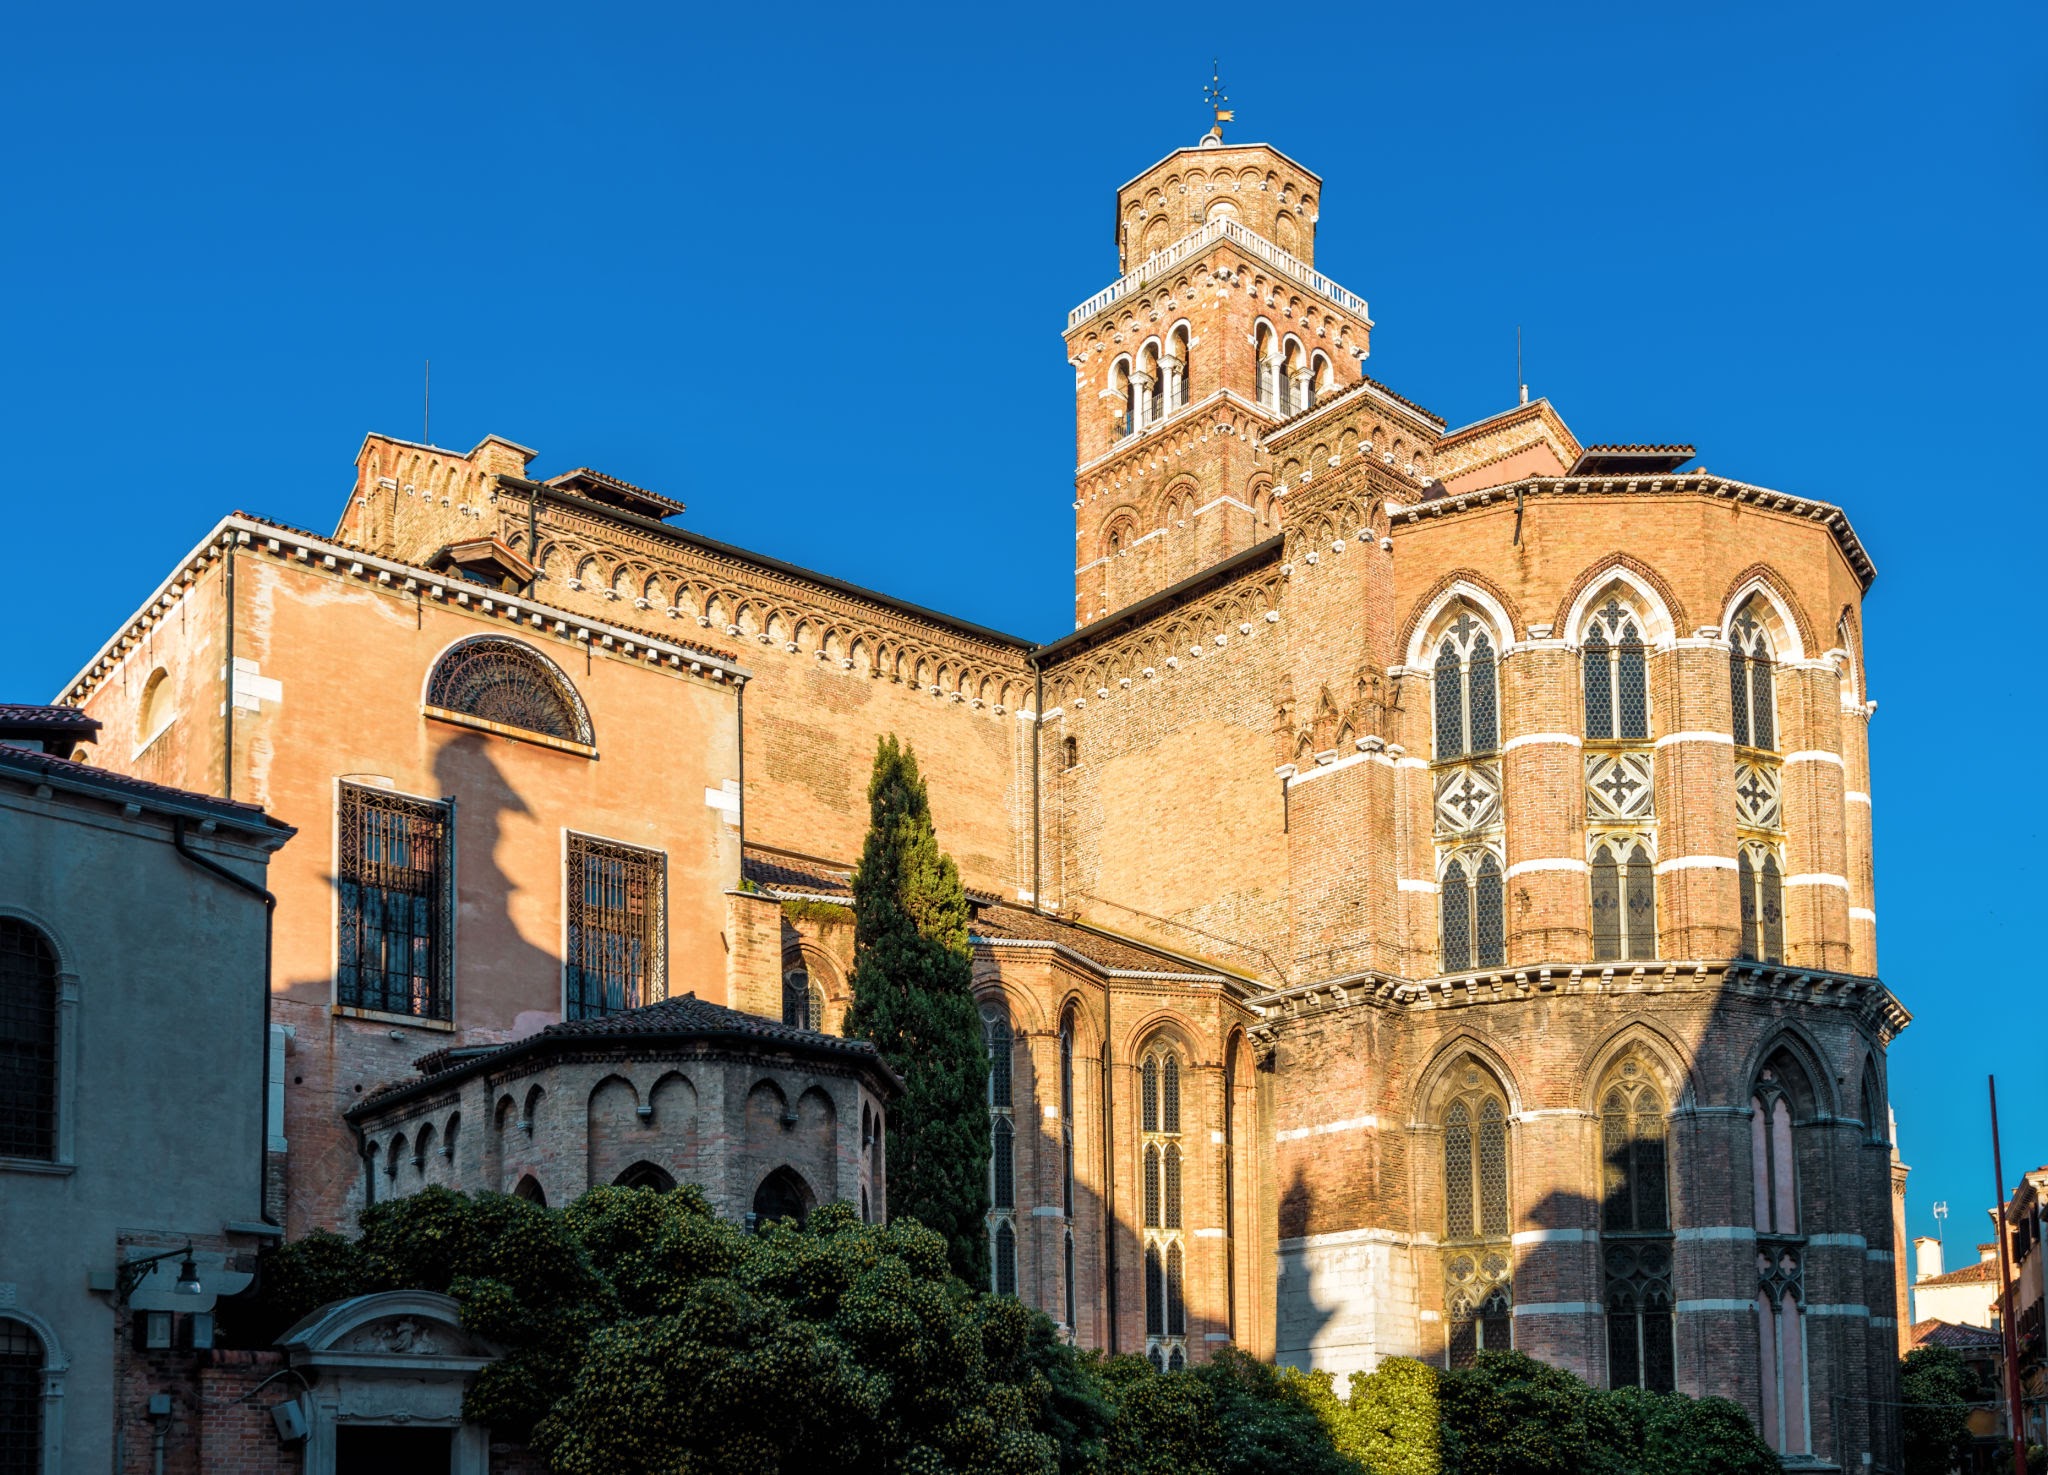 Cathedral of Santa Maria Gloriosa dei Frari in Italy, Europe | Architecture - Rated 3.9